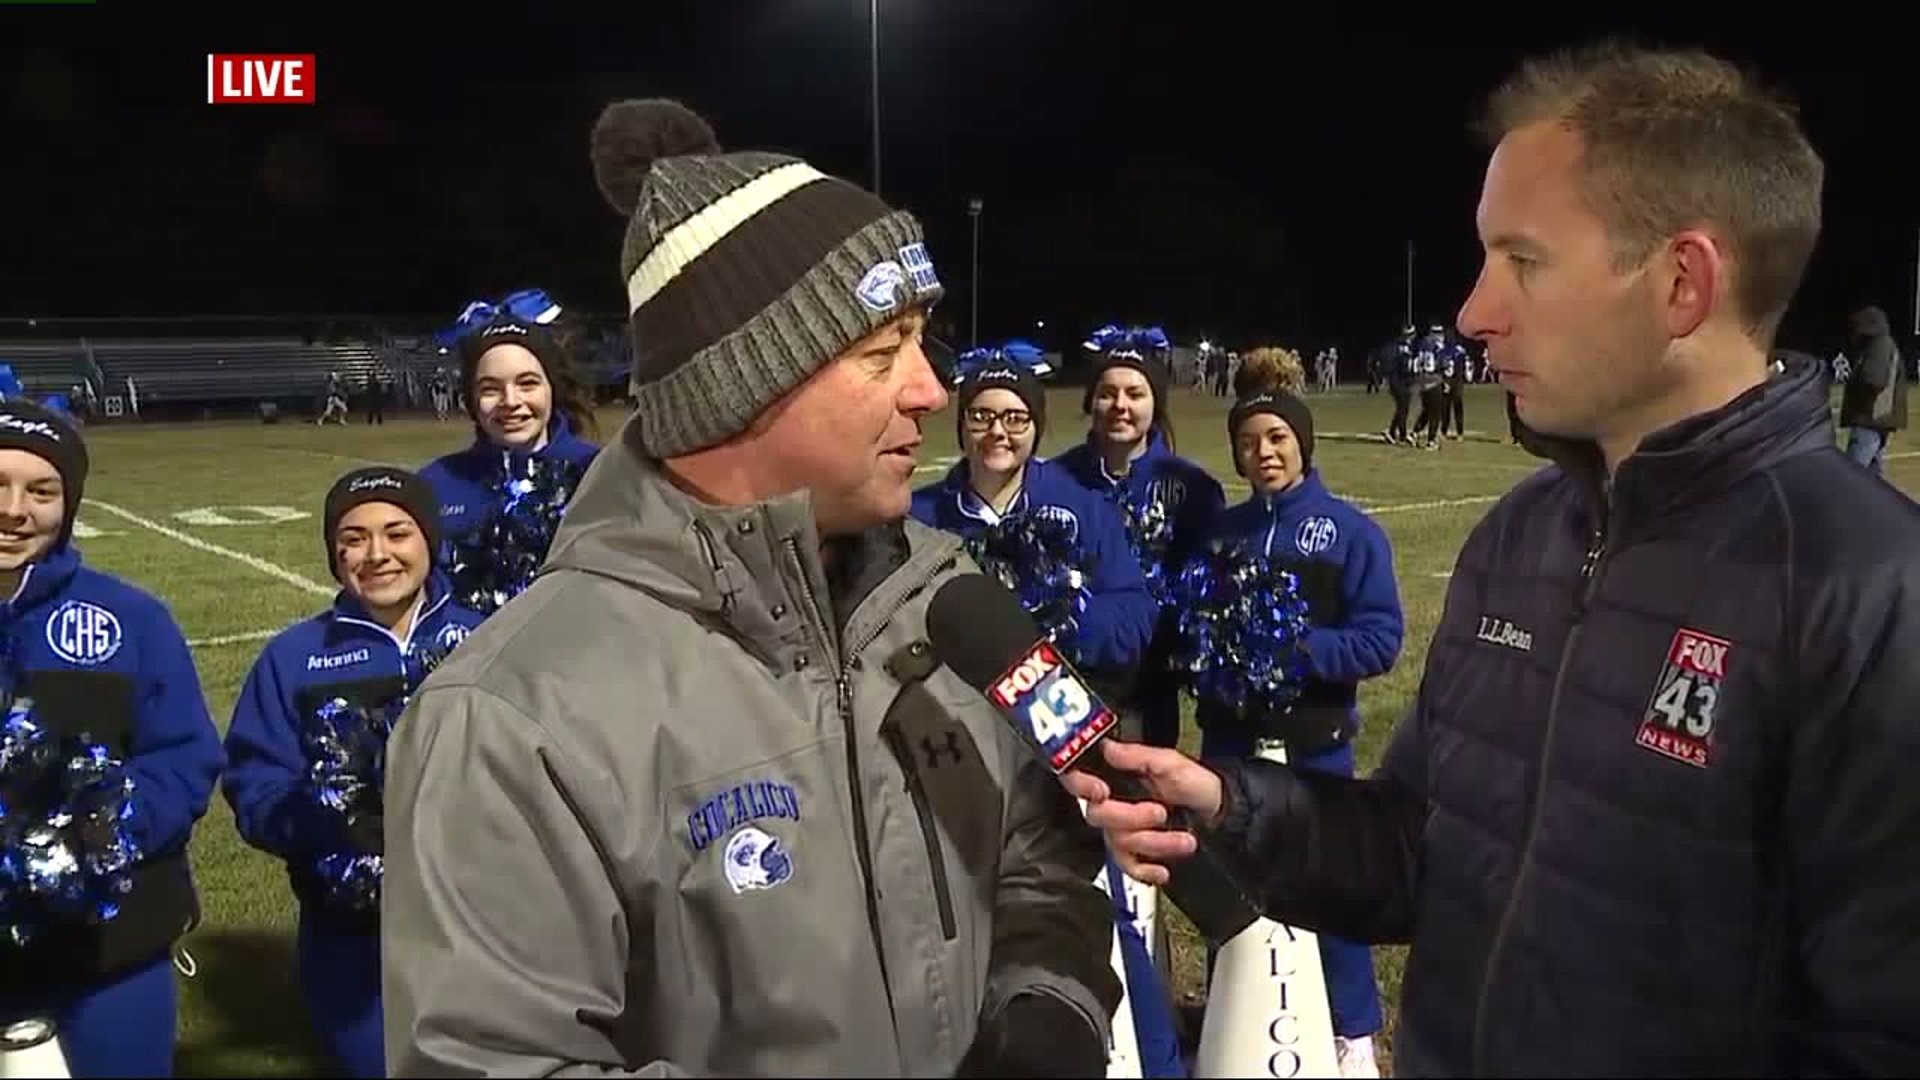 HSFF `Game of the Week` coaches interviews: Dave Gingrich, Cocalico Head Coach